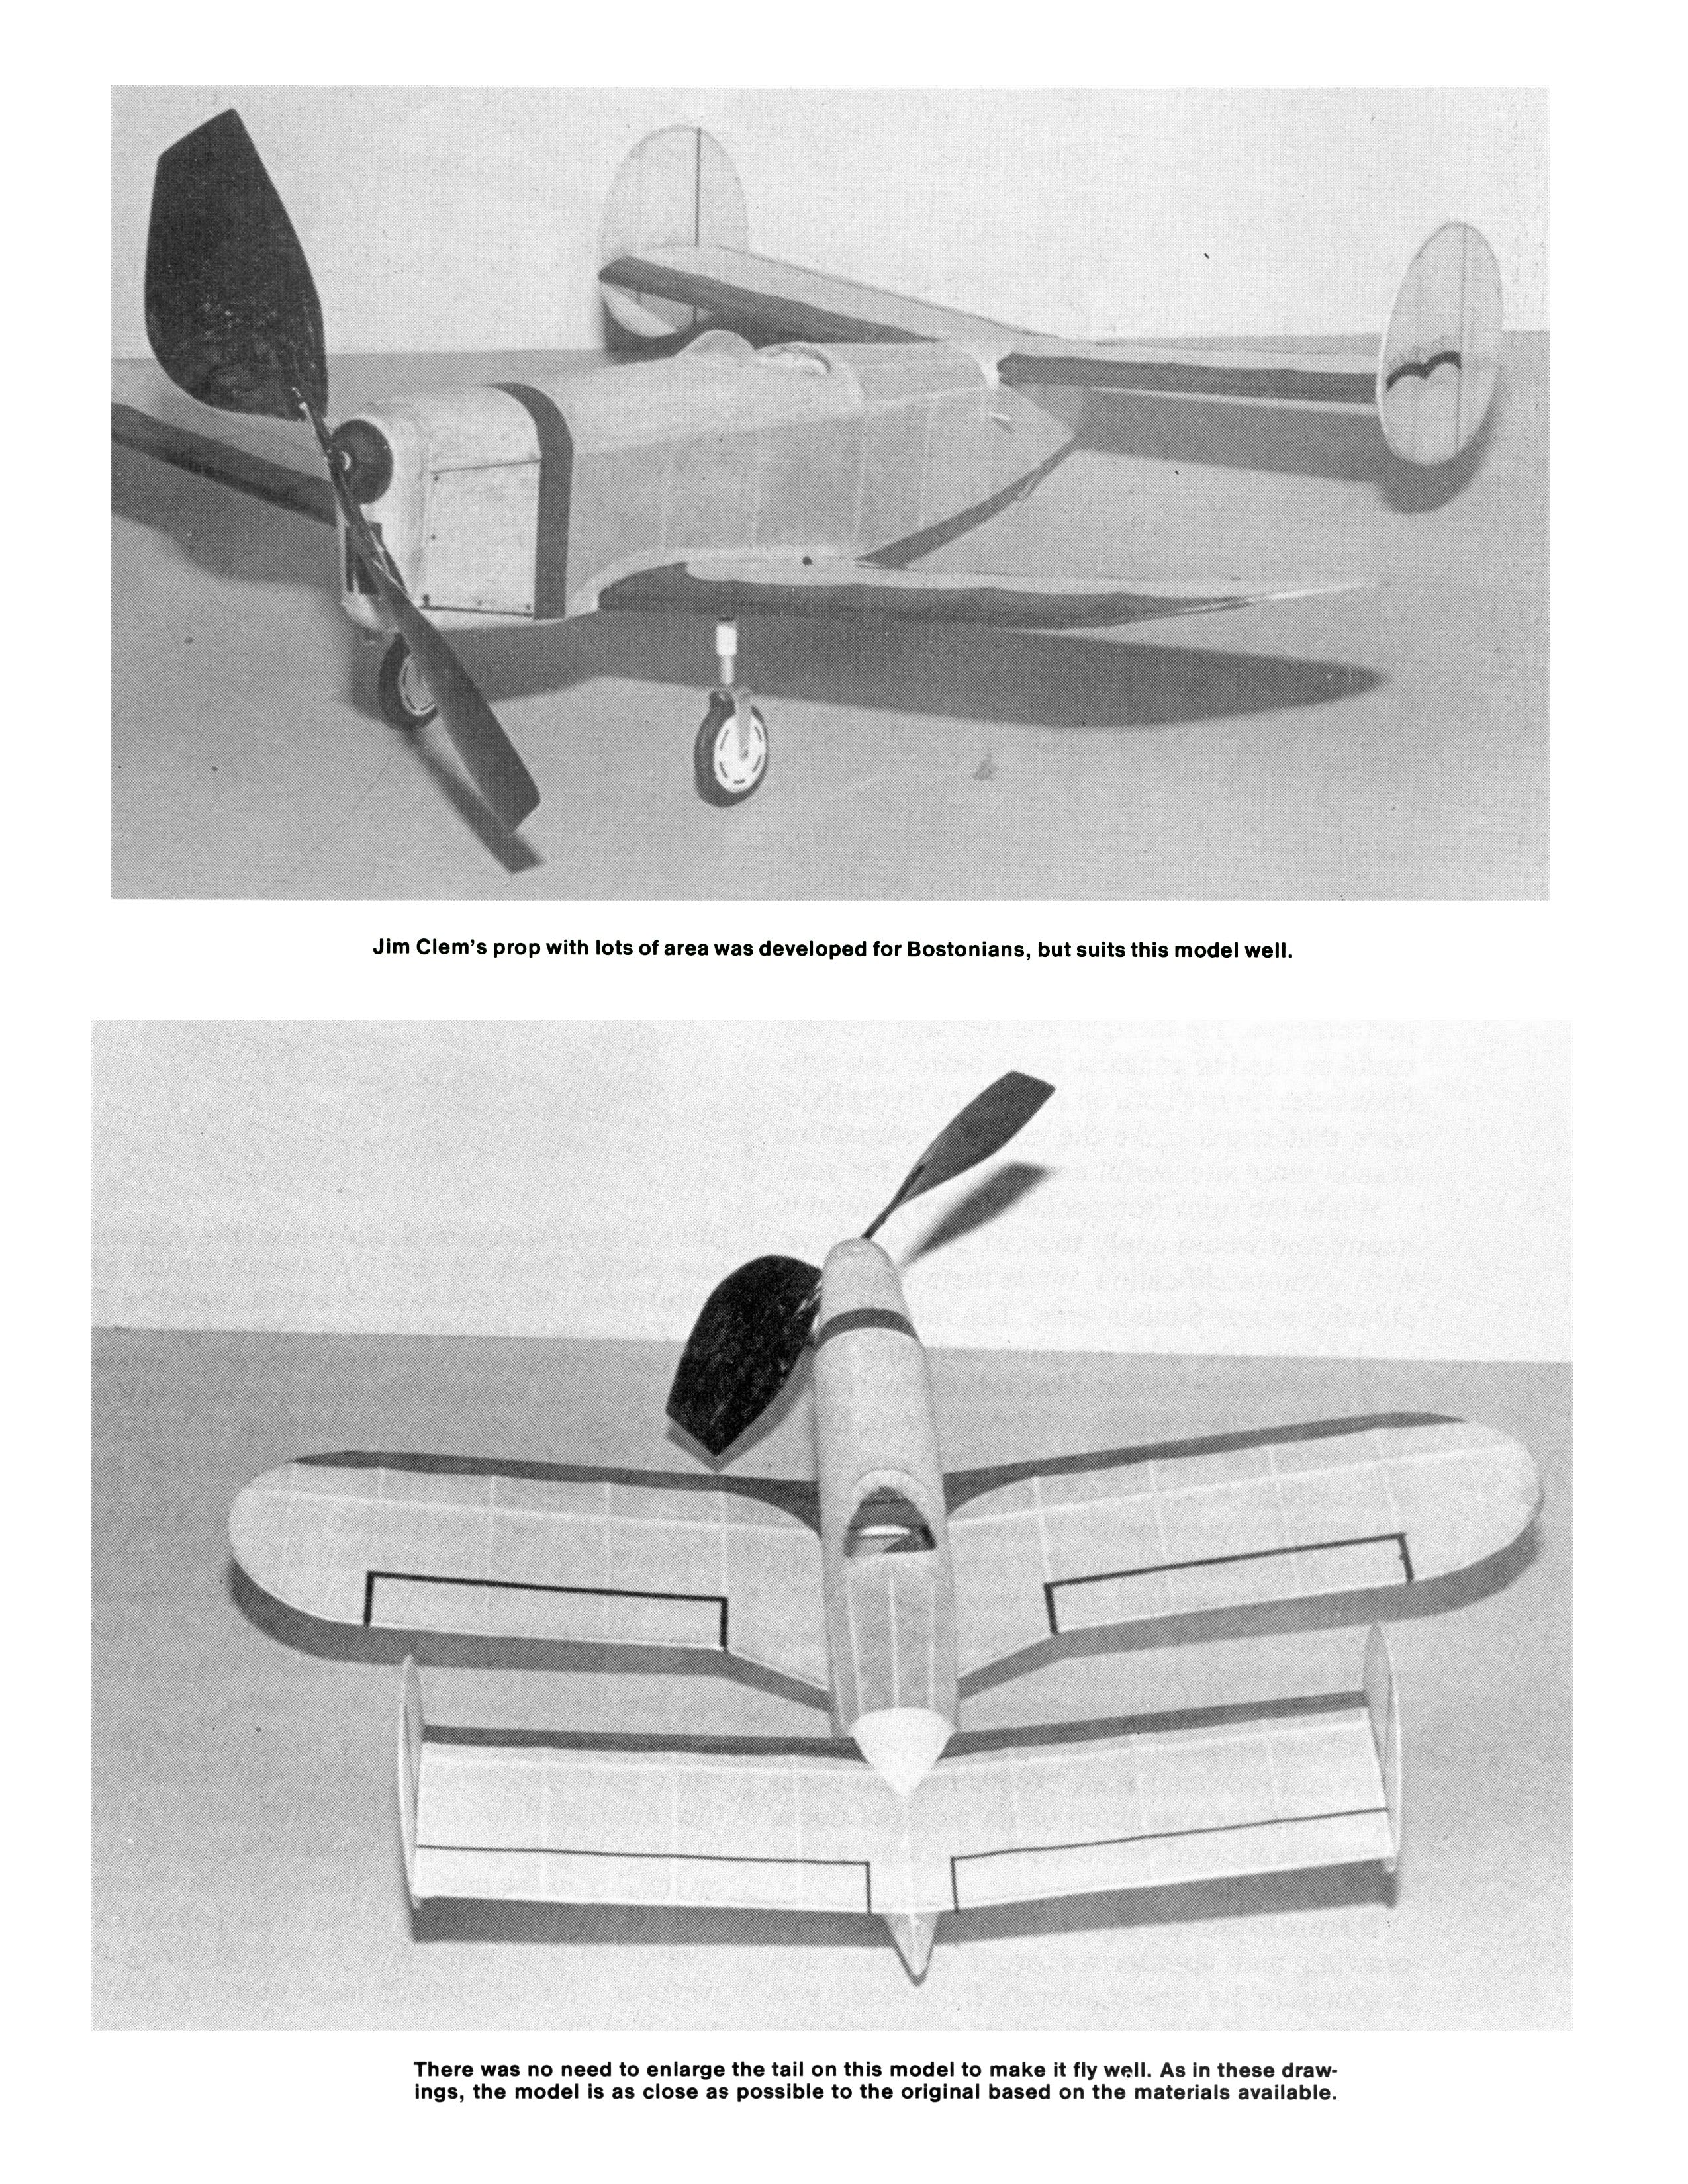 full size printed plans  peanut scale "maboussin type 40 hemiptere"  very stable flight pattern